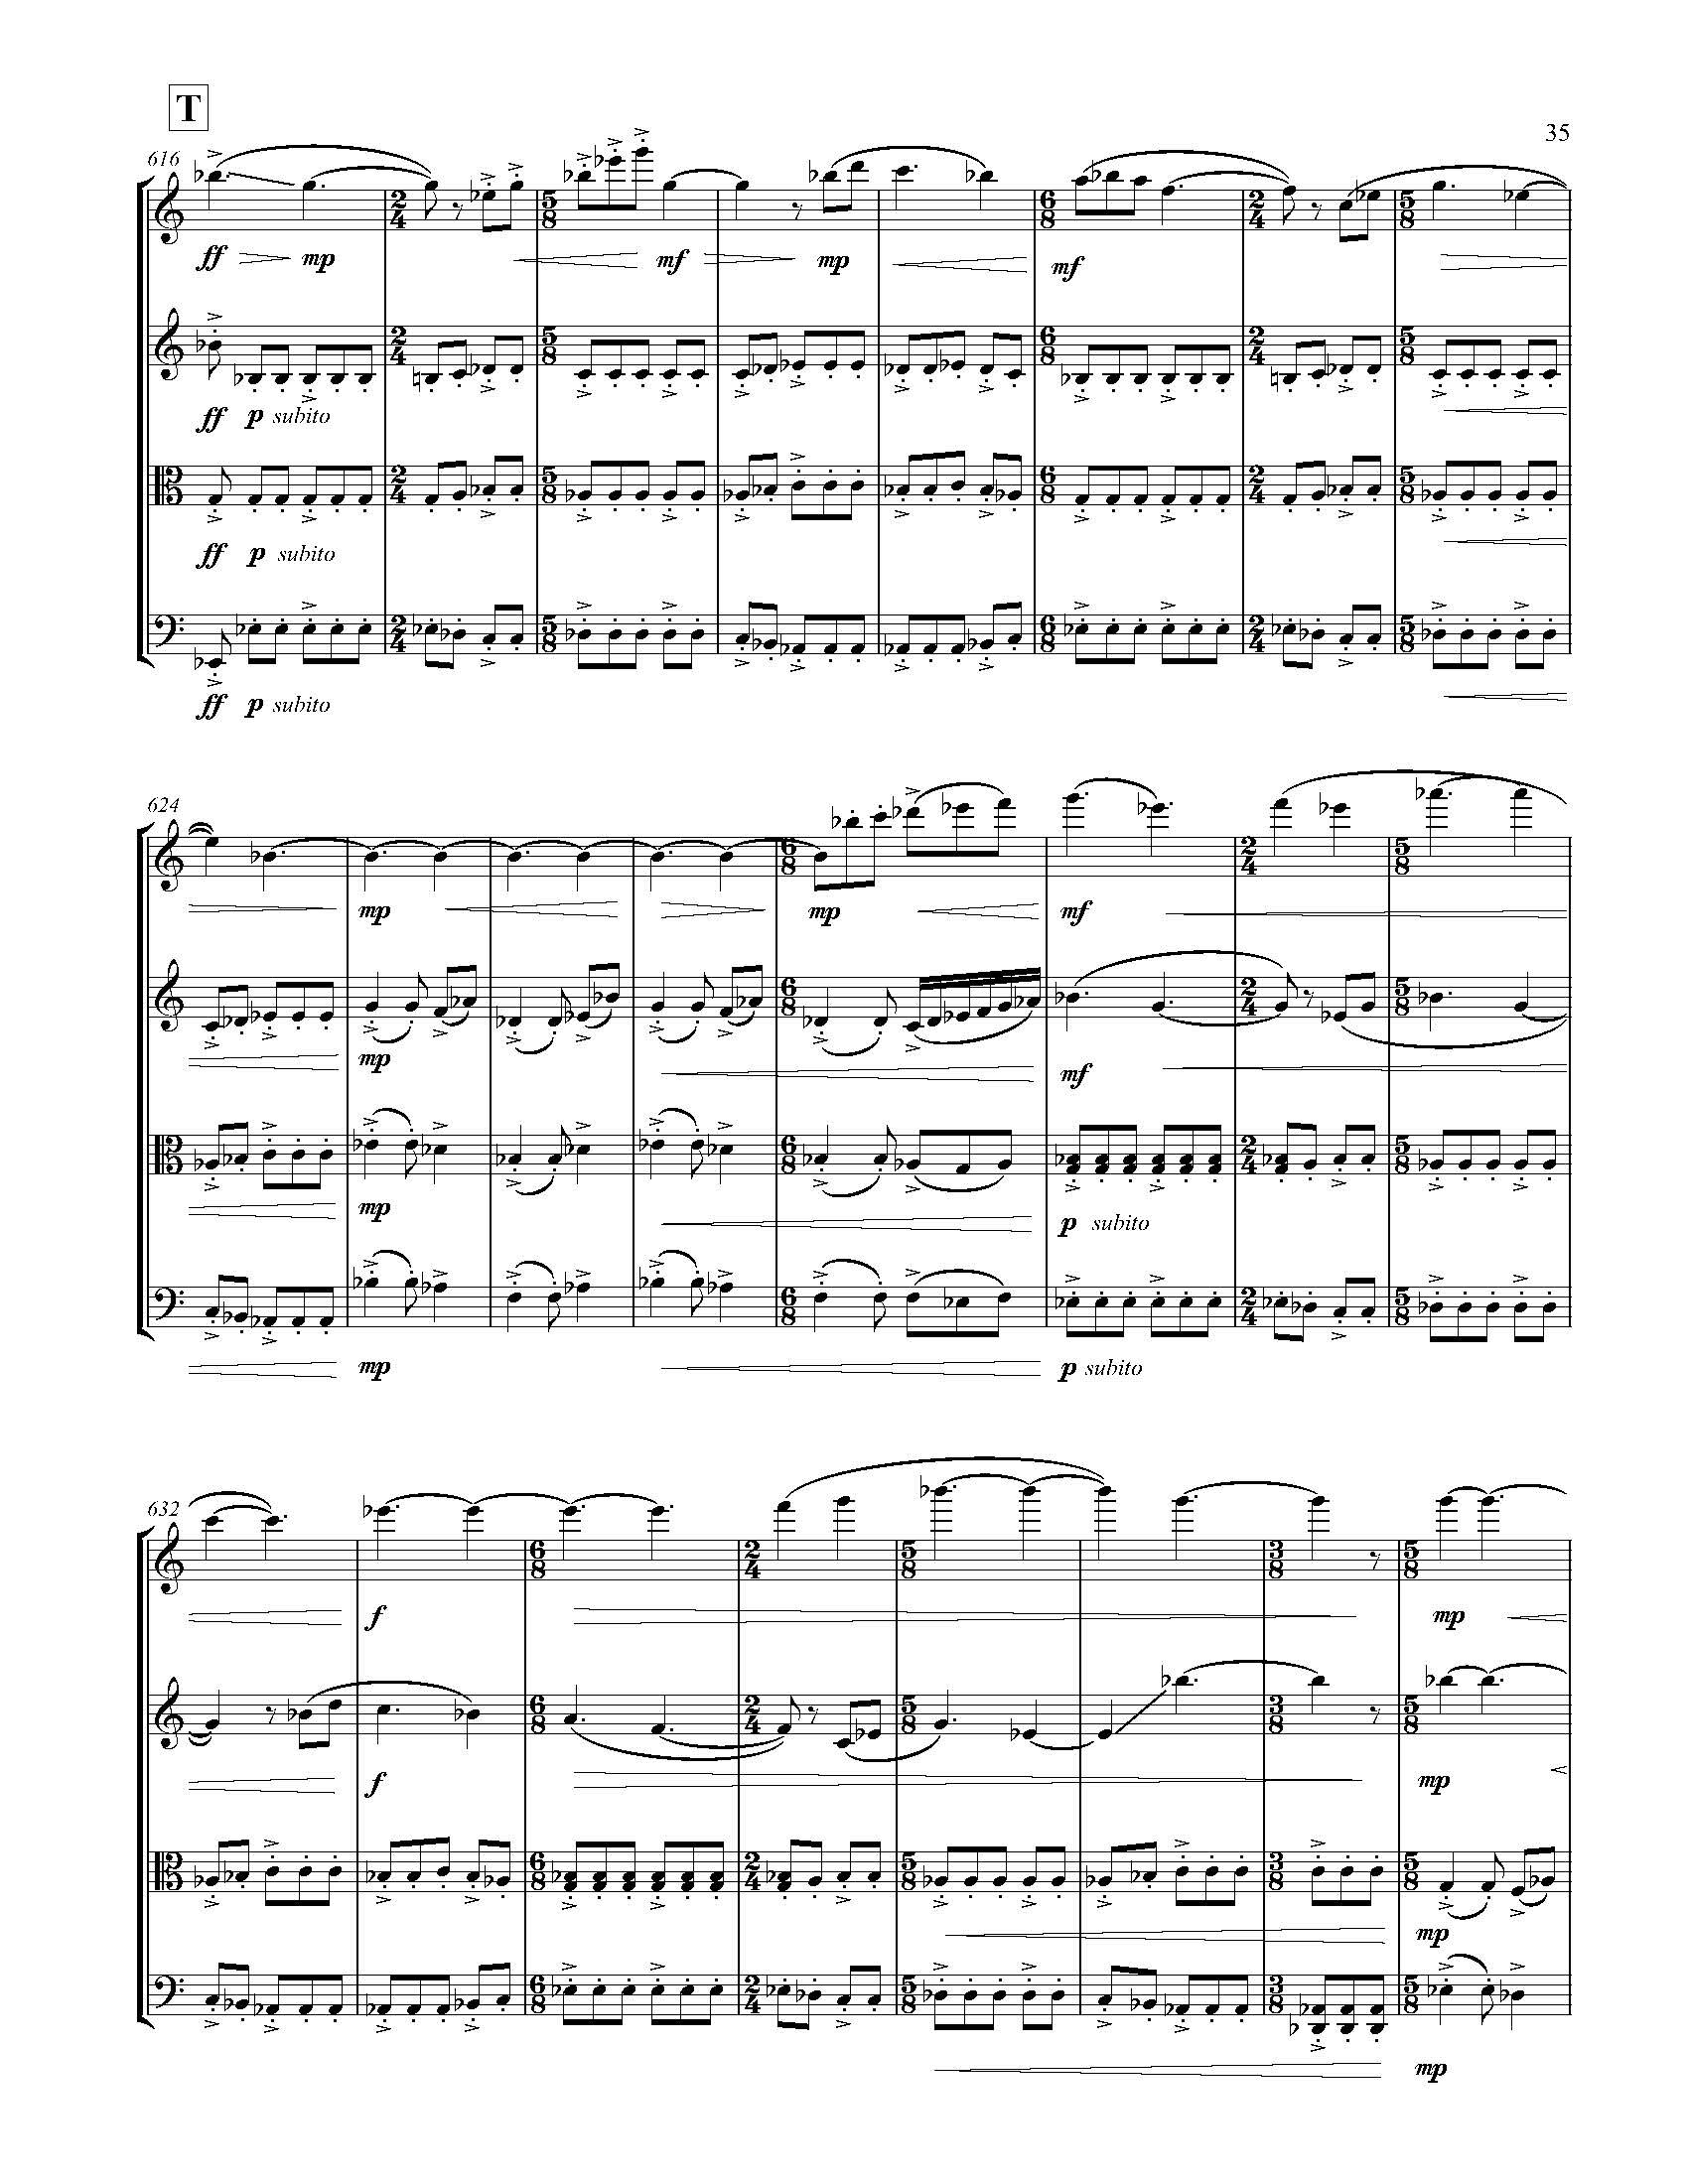 A Country of Vast Designs - Complete Score_Page_41.jpg